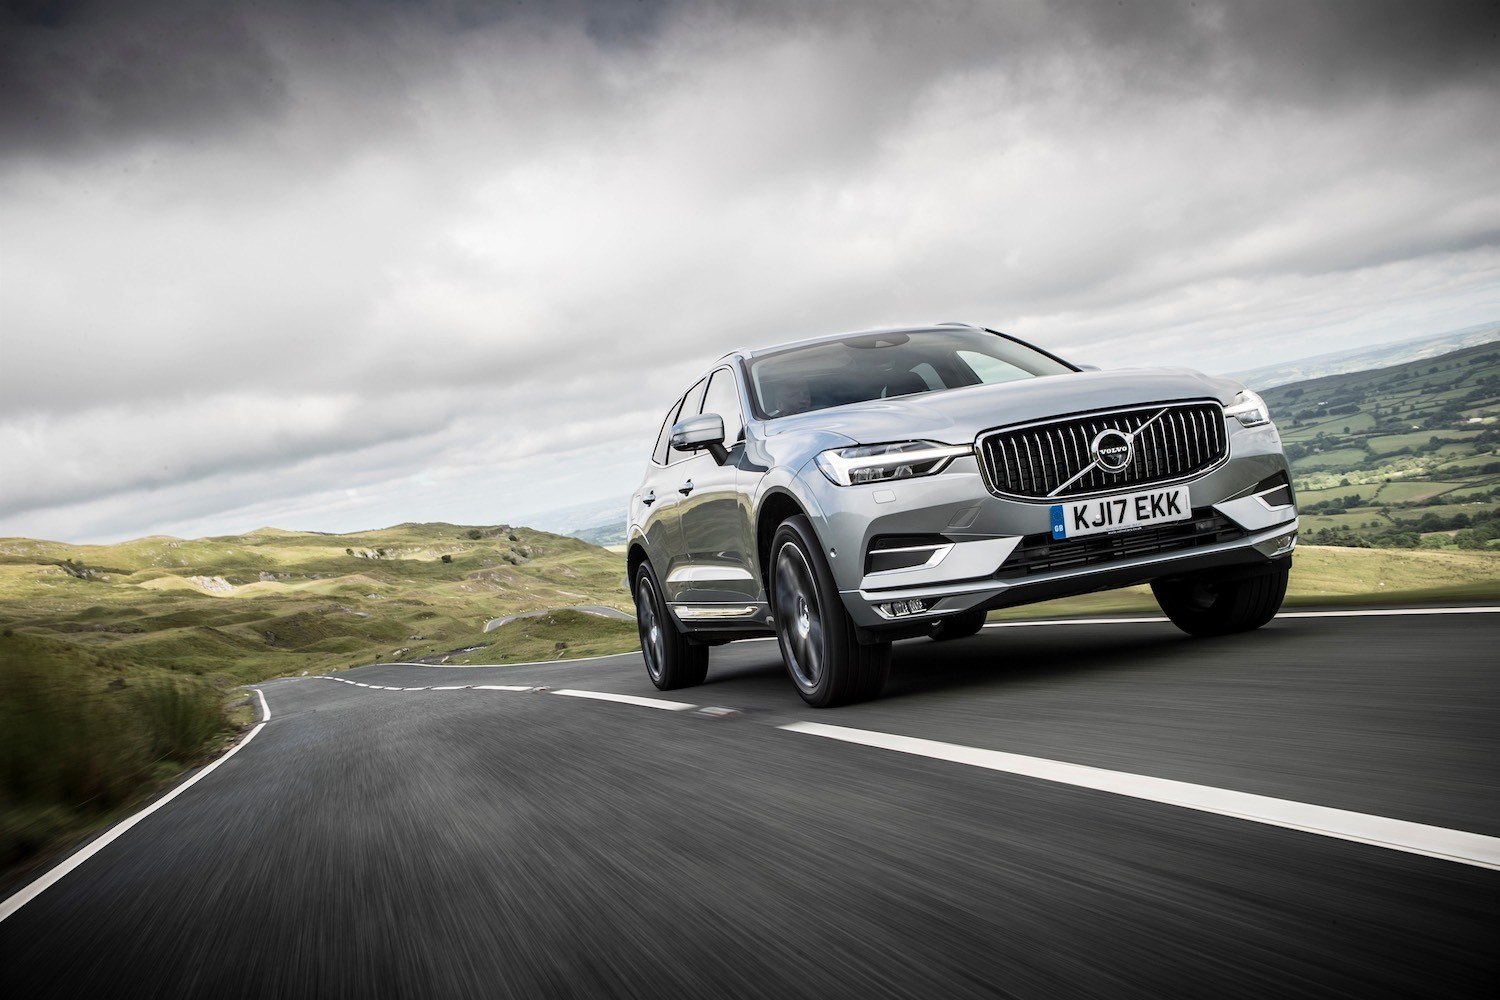 Neil Lyndon reviews the All New Volvo XC60 for Drive 12